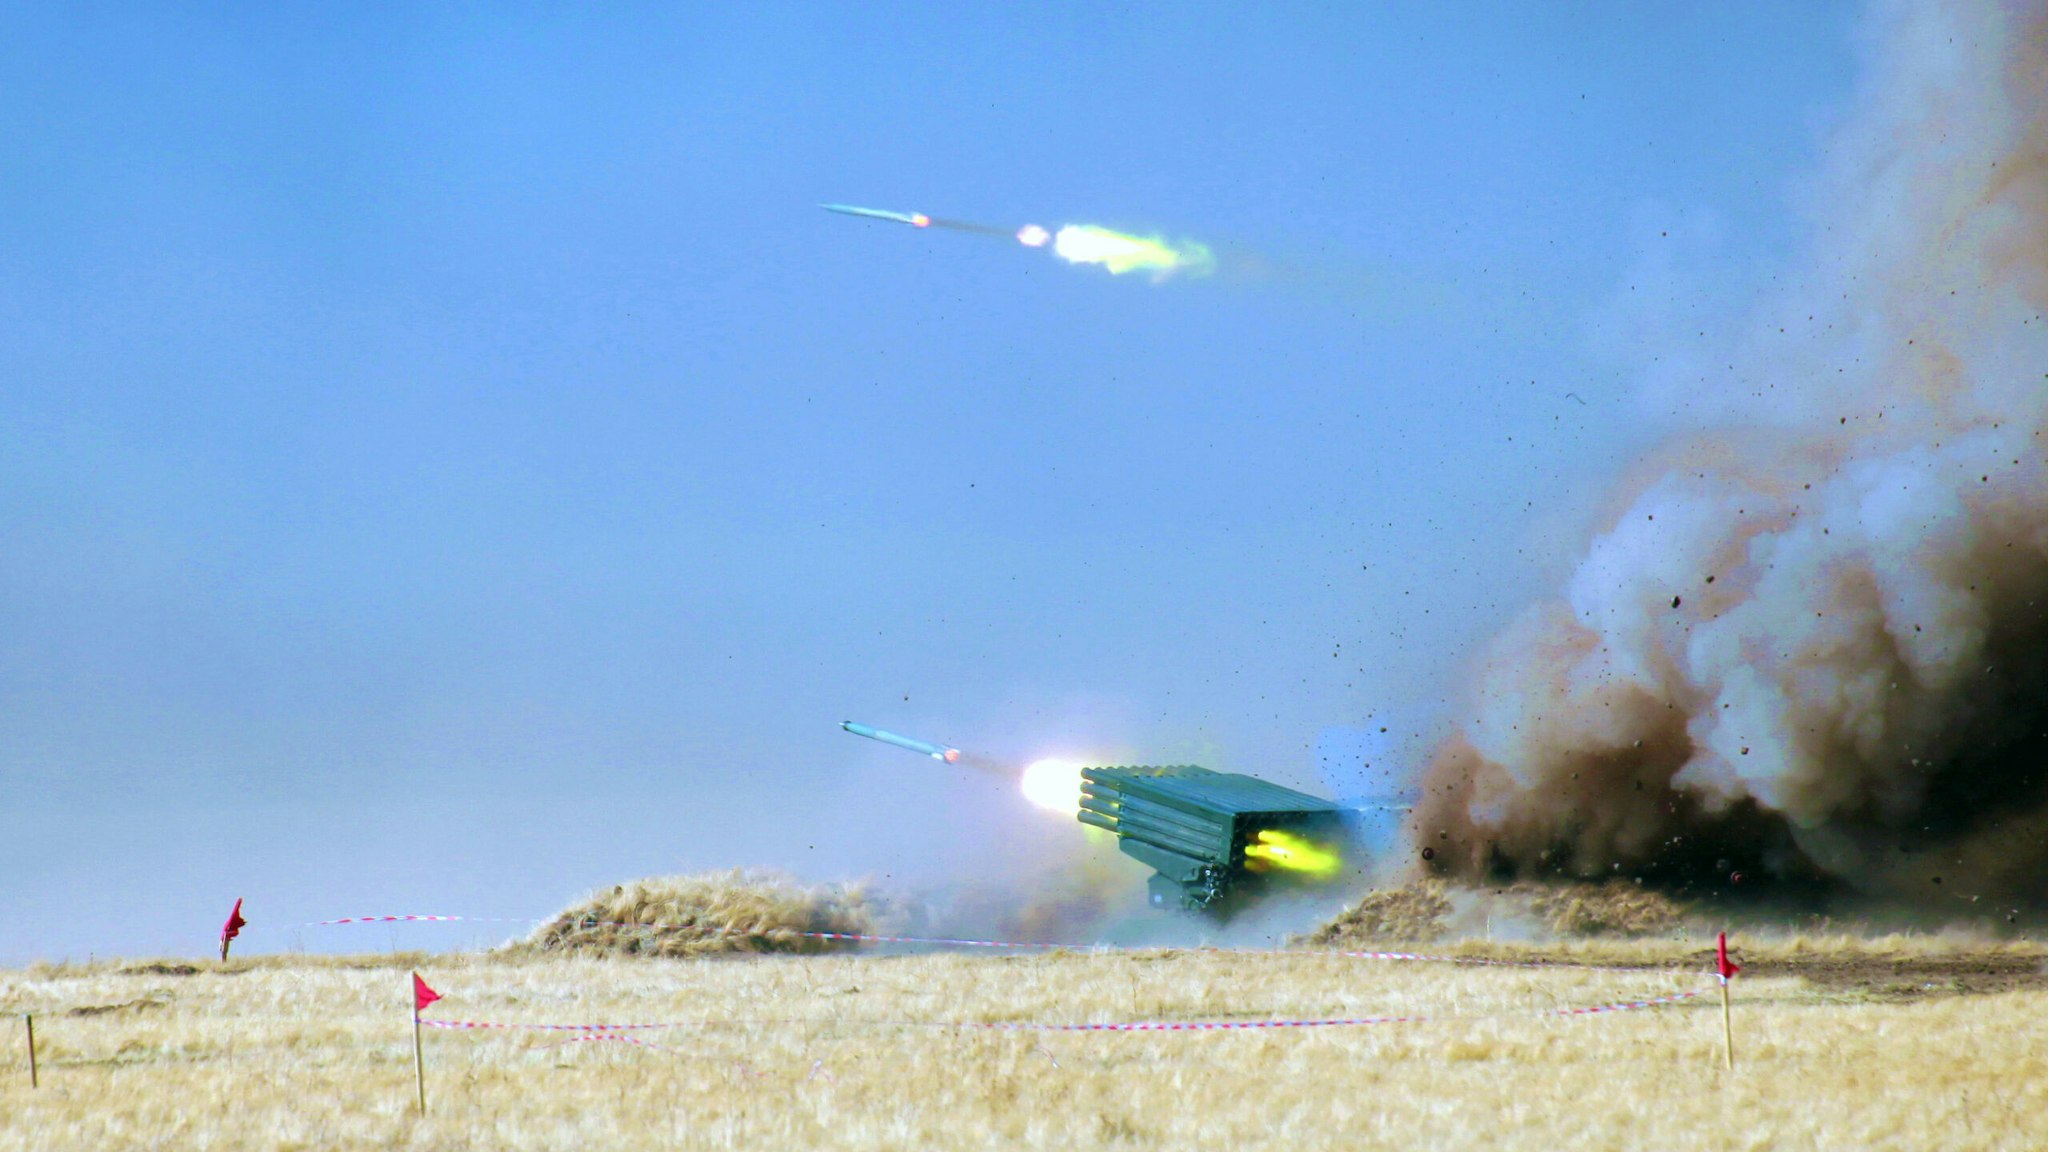 ORENBURG, RUSSIA - SEPTEMBER 23: A multiple rocket launcher fires during the 'Peace Mission 2021' joint counterterrorism military exercise on September 23, 2021 in Orenburg, Russia.